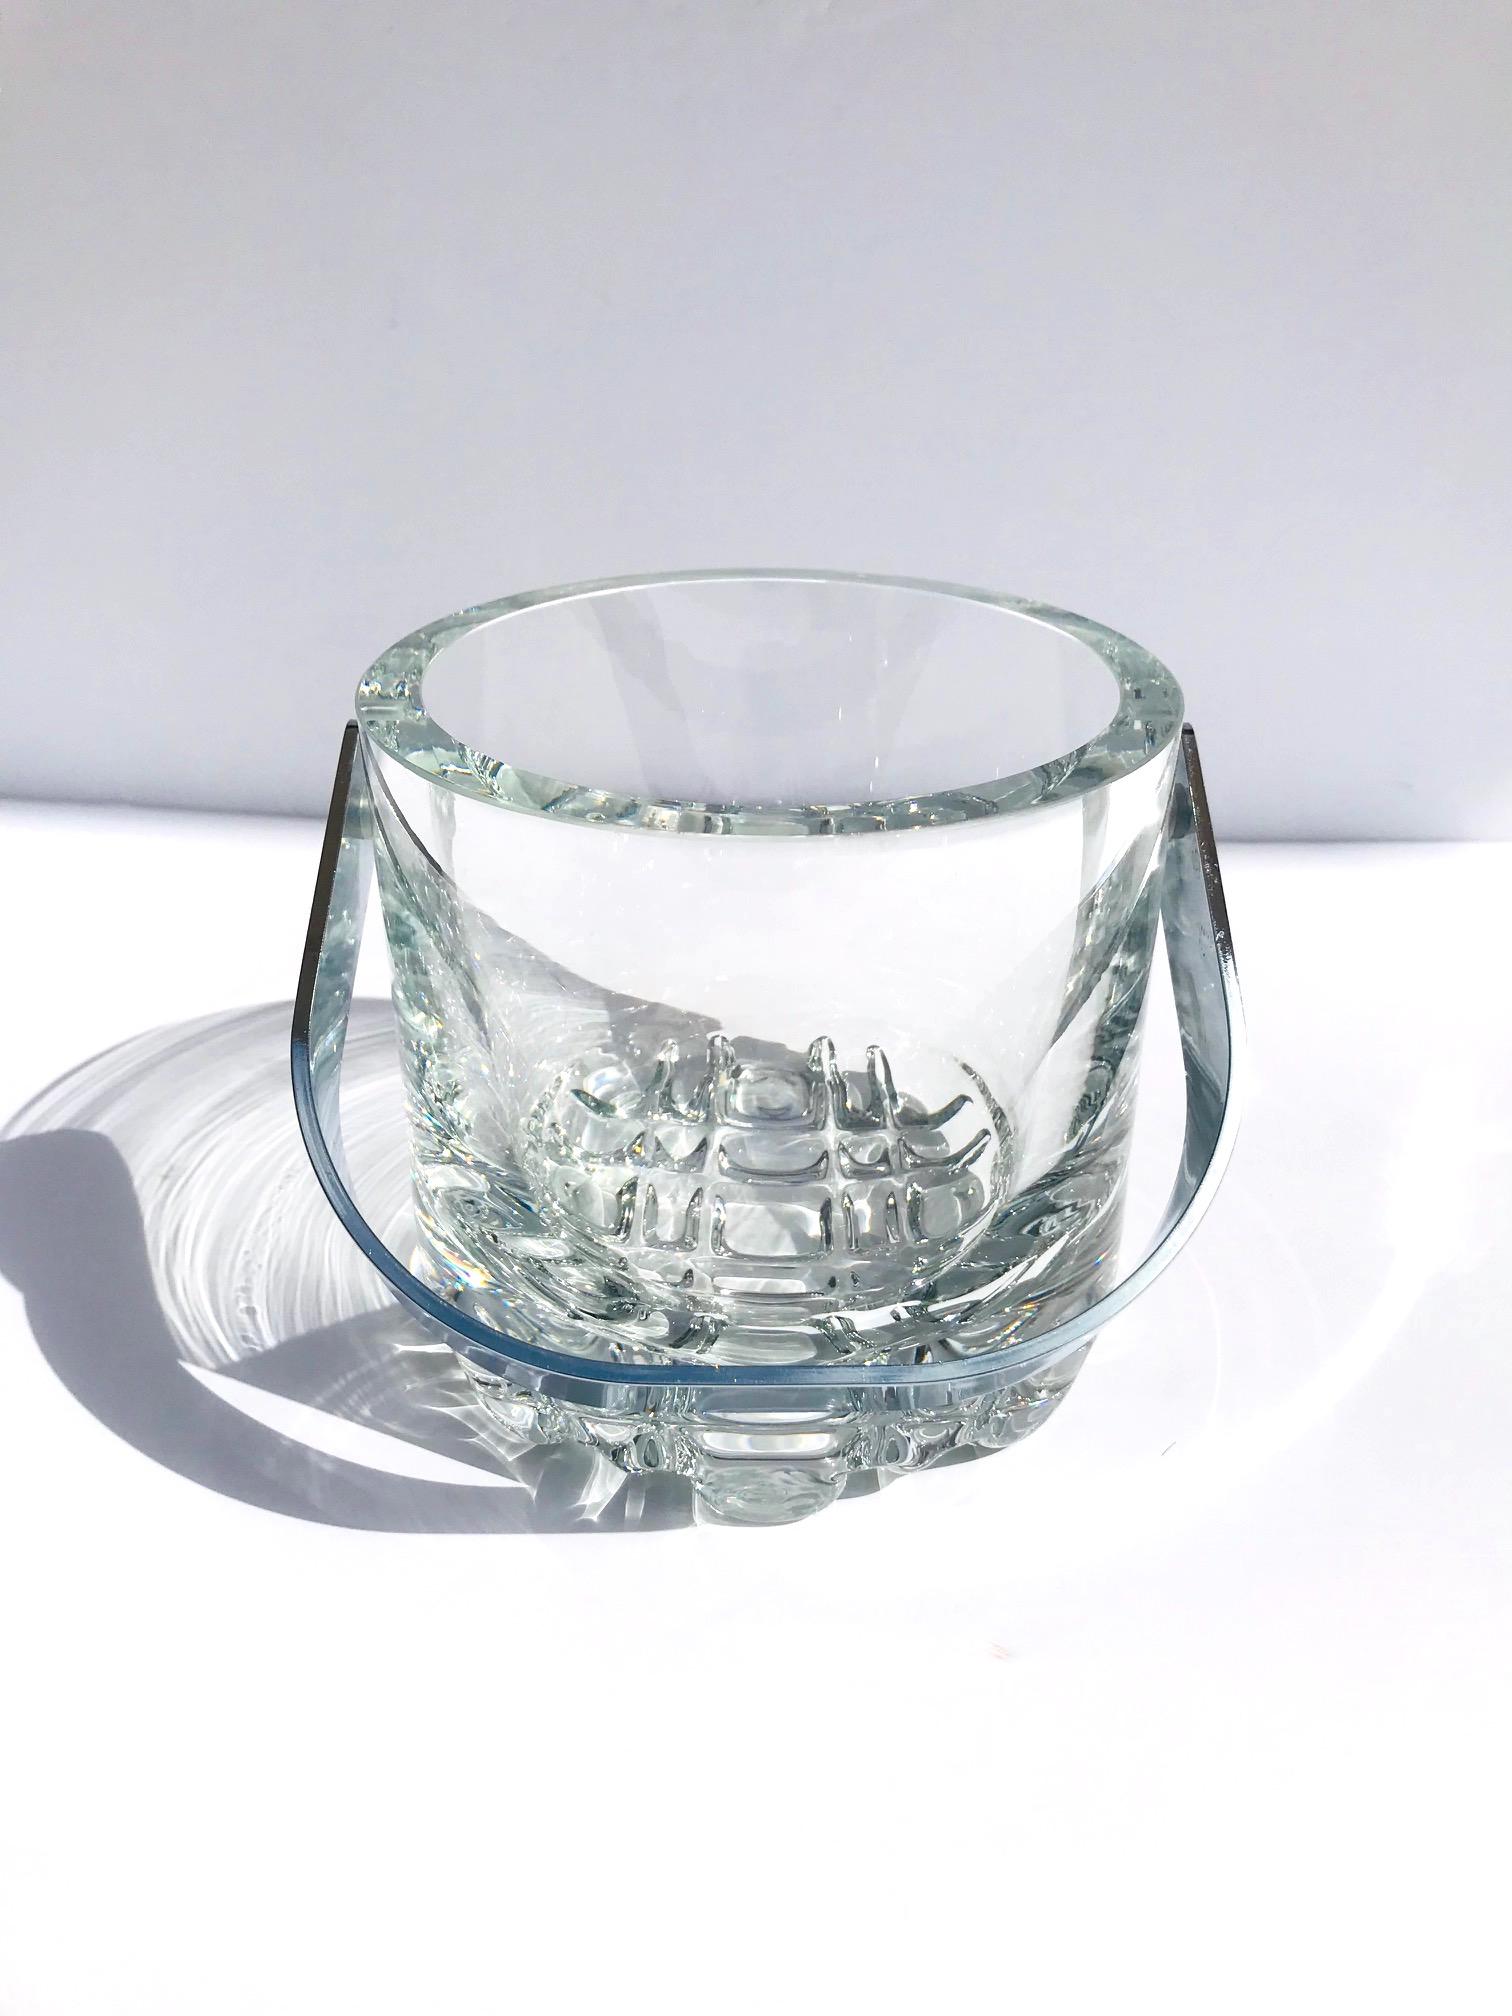 Exceptional Mid-Century Modern heavyweight crystal ice bucket. Heavy rounded edges with rock ice glass design along the base and with stainless steel handle. Makes a handsome addition to any barware set and can double as a wine cooler.